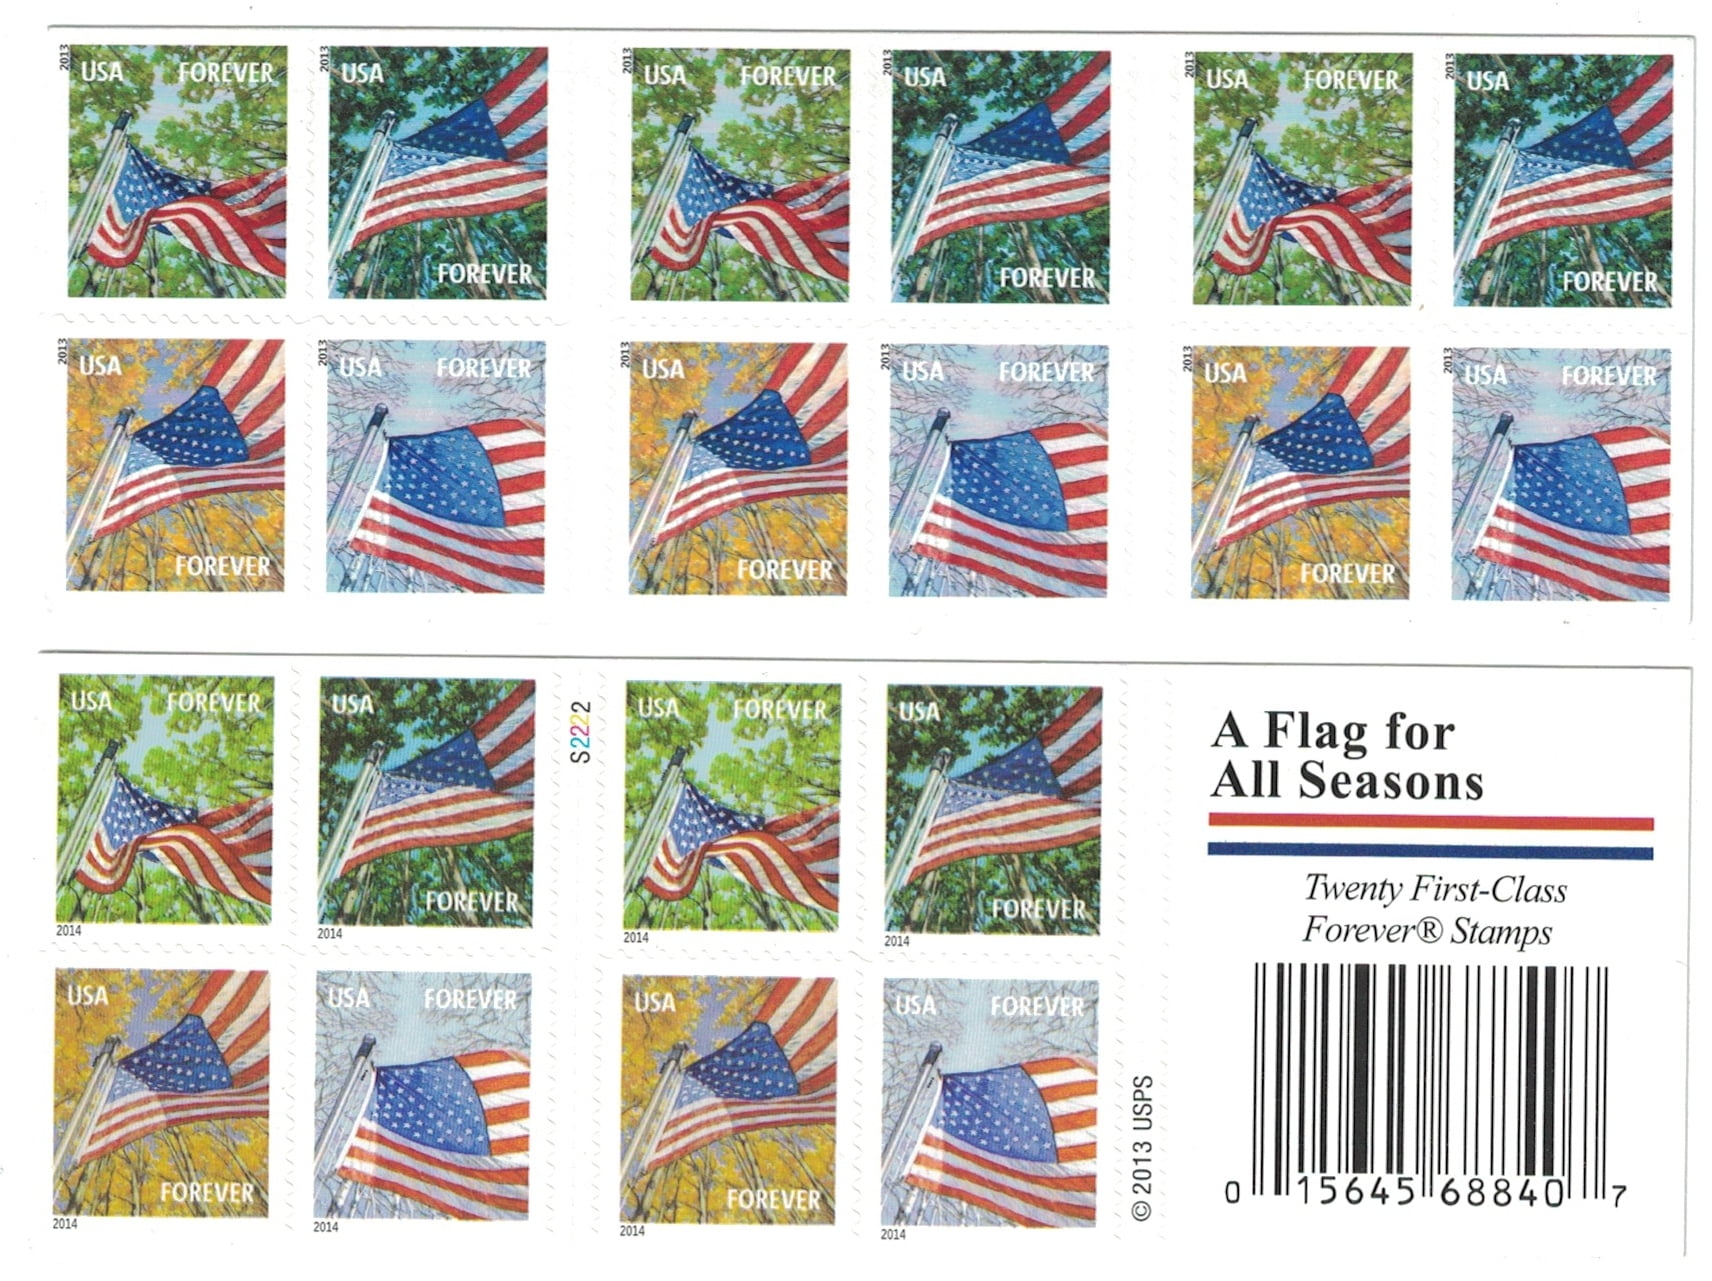 USPS A Flag for All Seasons Forever Stamps - Book of 20 Postage Stamps 